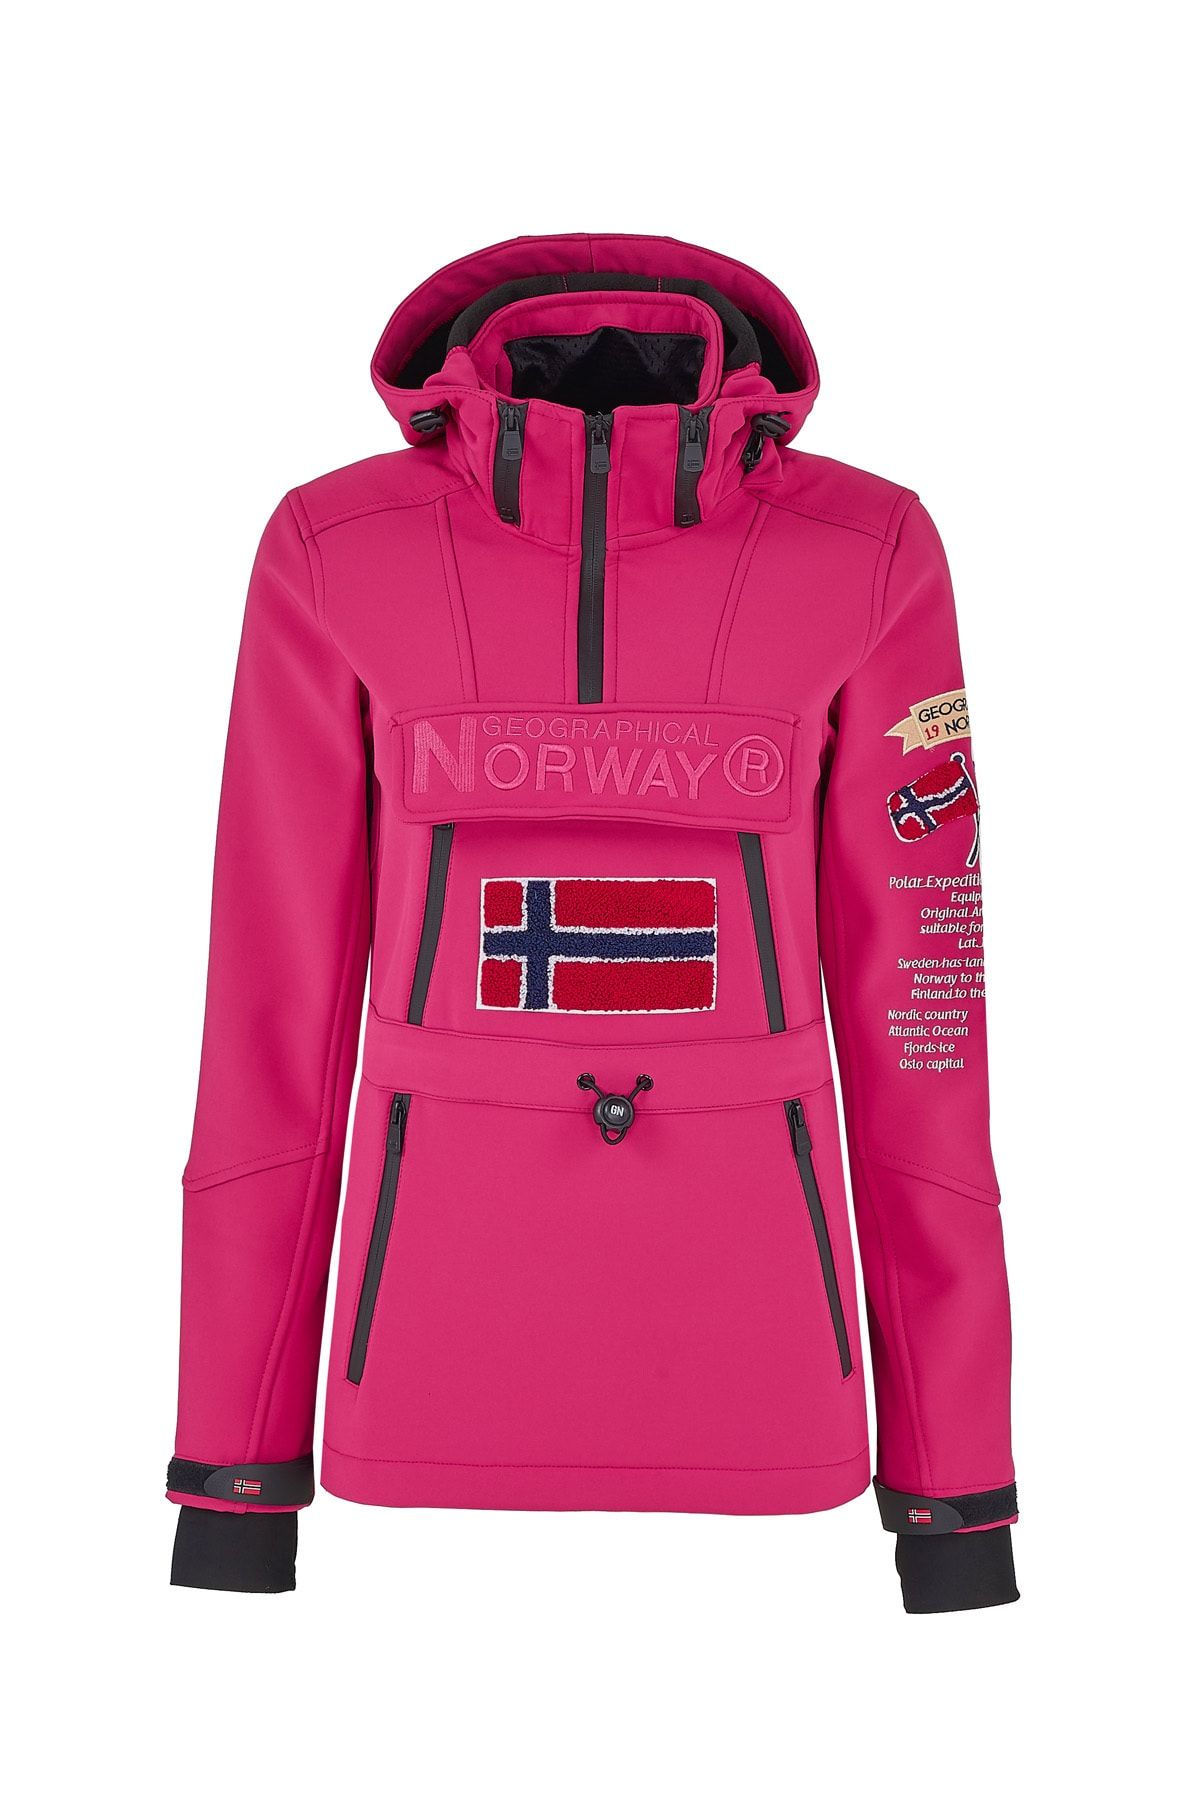 GEOGRAPHICAL NORWAY Chaqueta mujer BUILDING rosa - Private Sport Shop